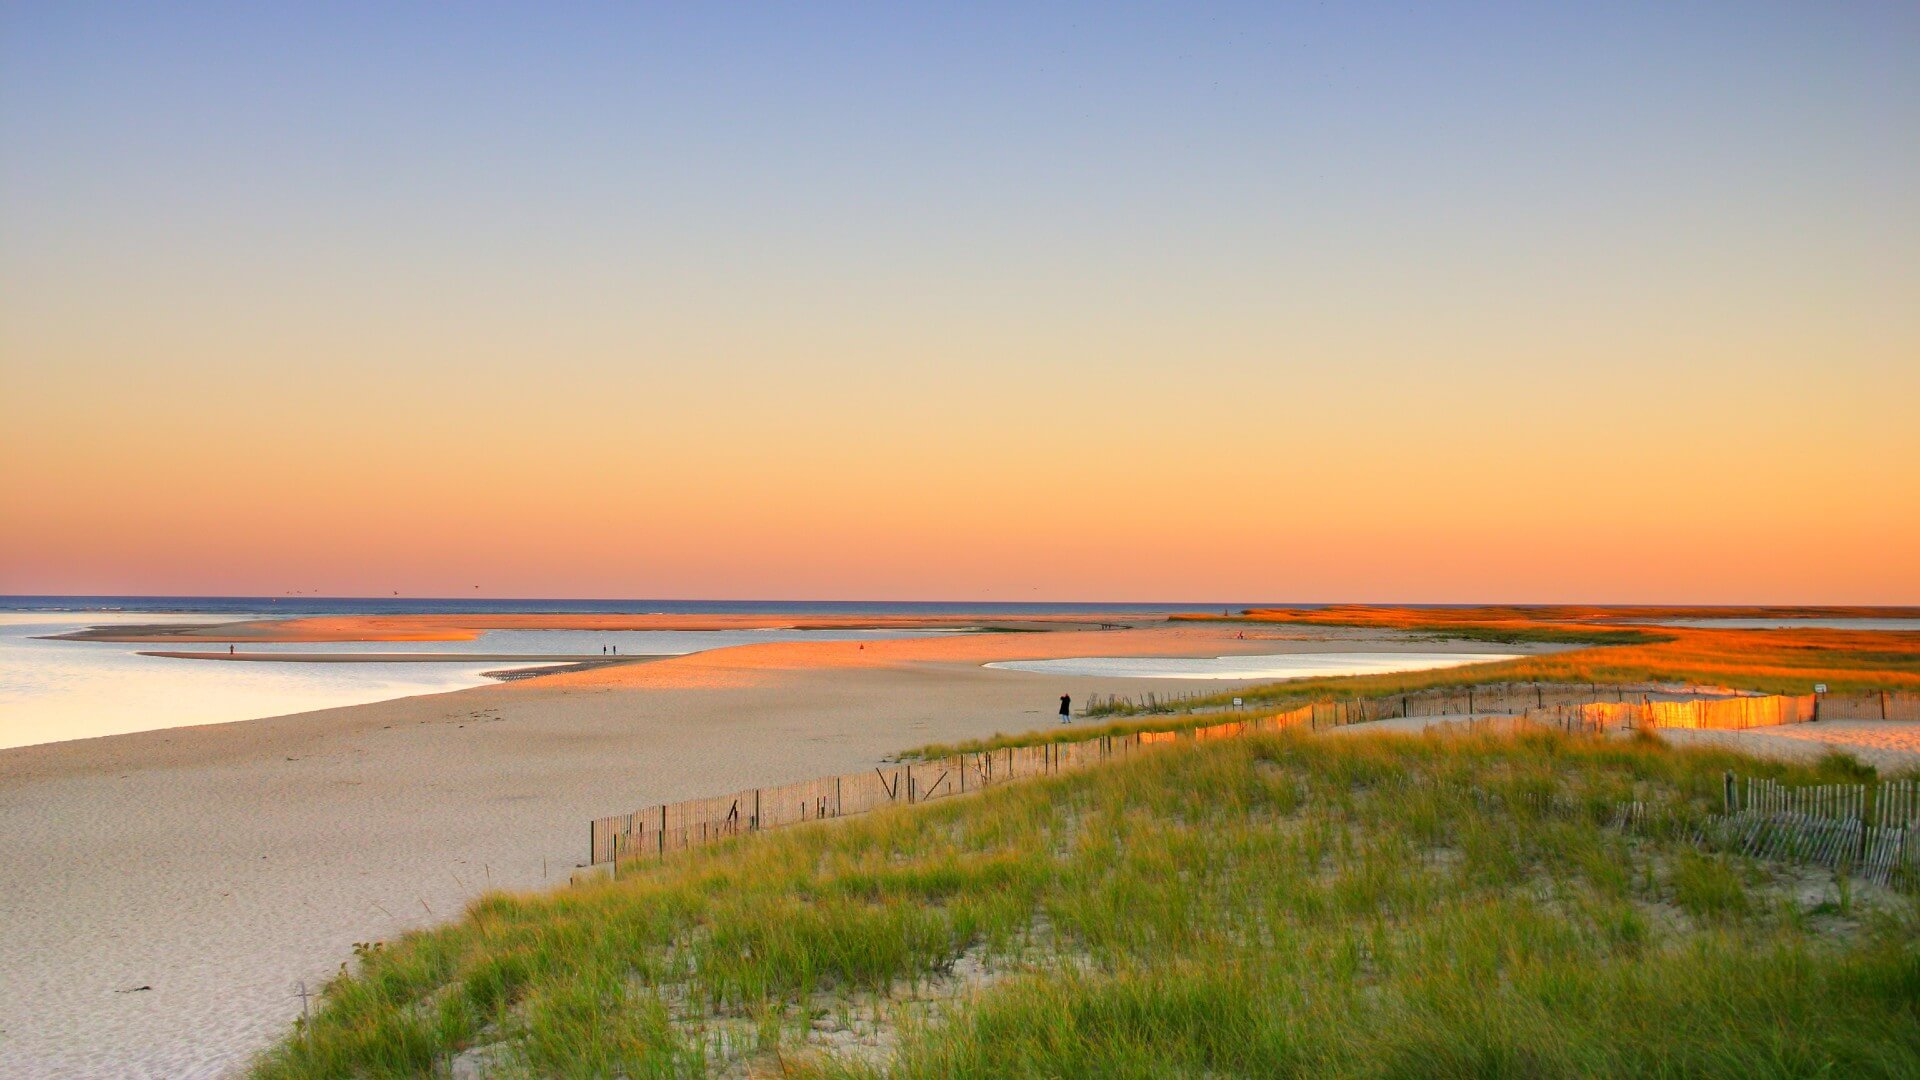 Expansive beach area with grassy dune and fencing under sunset skies